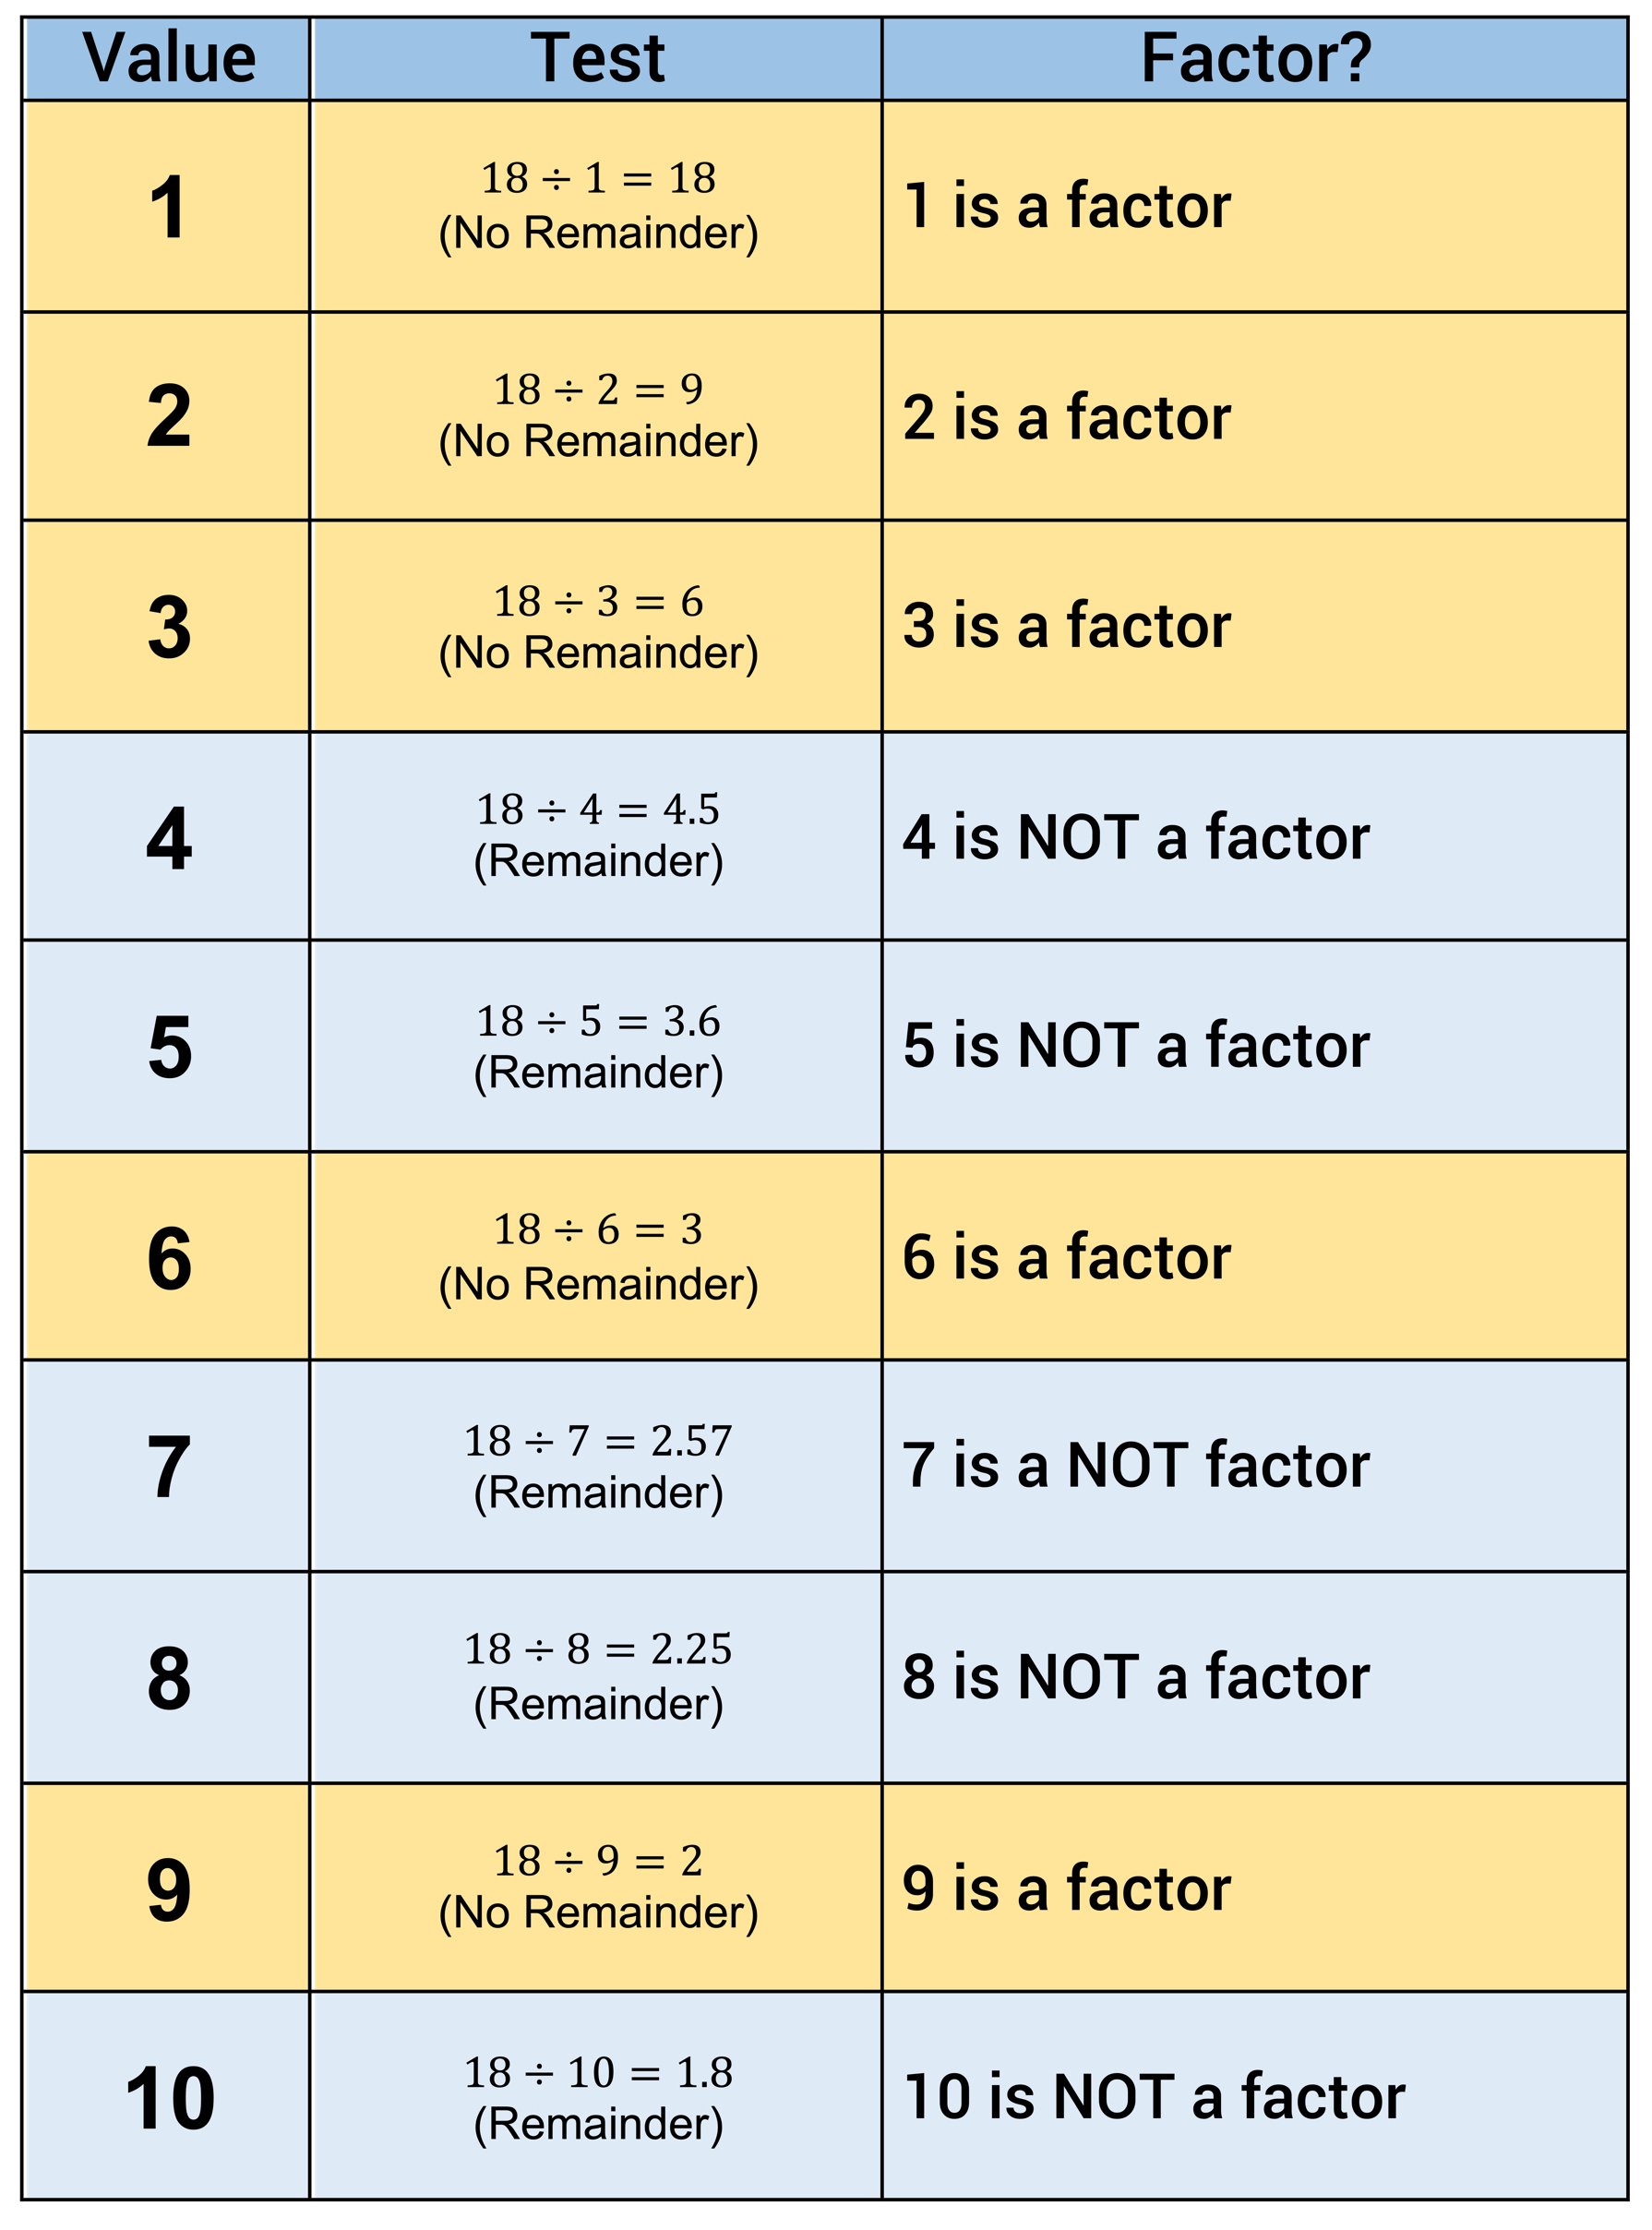 What is a factor? 